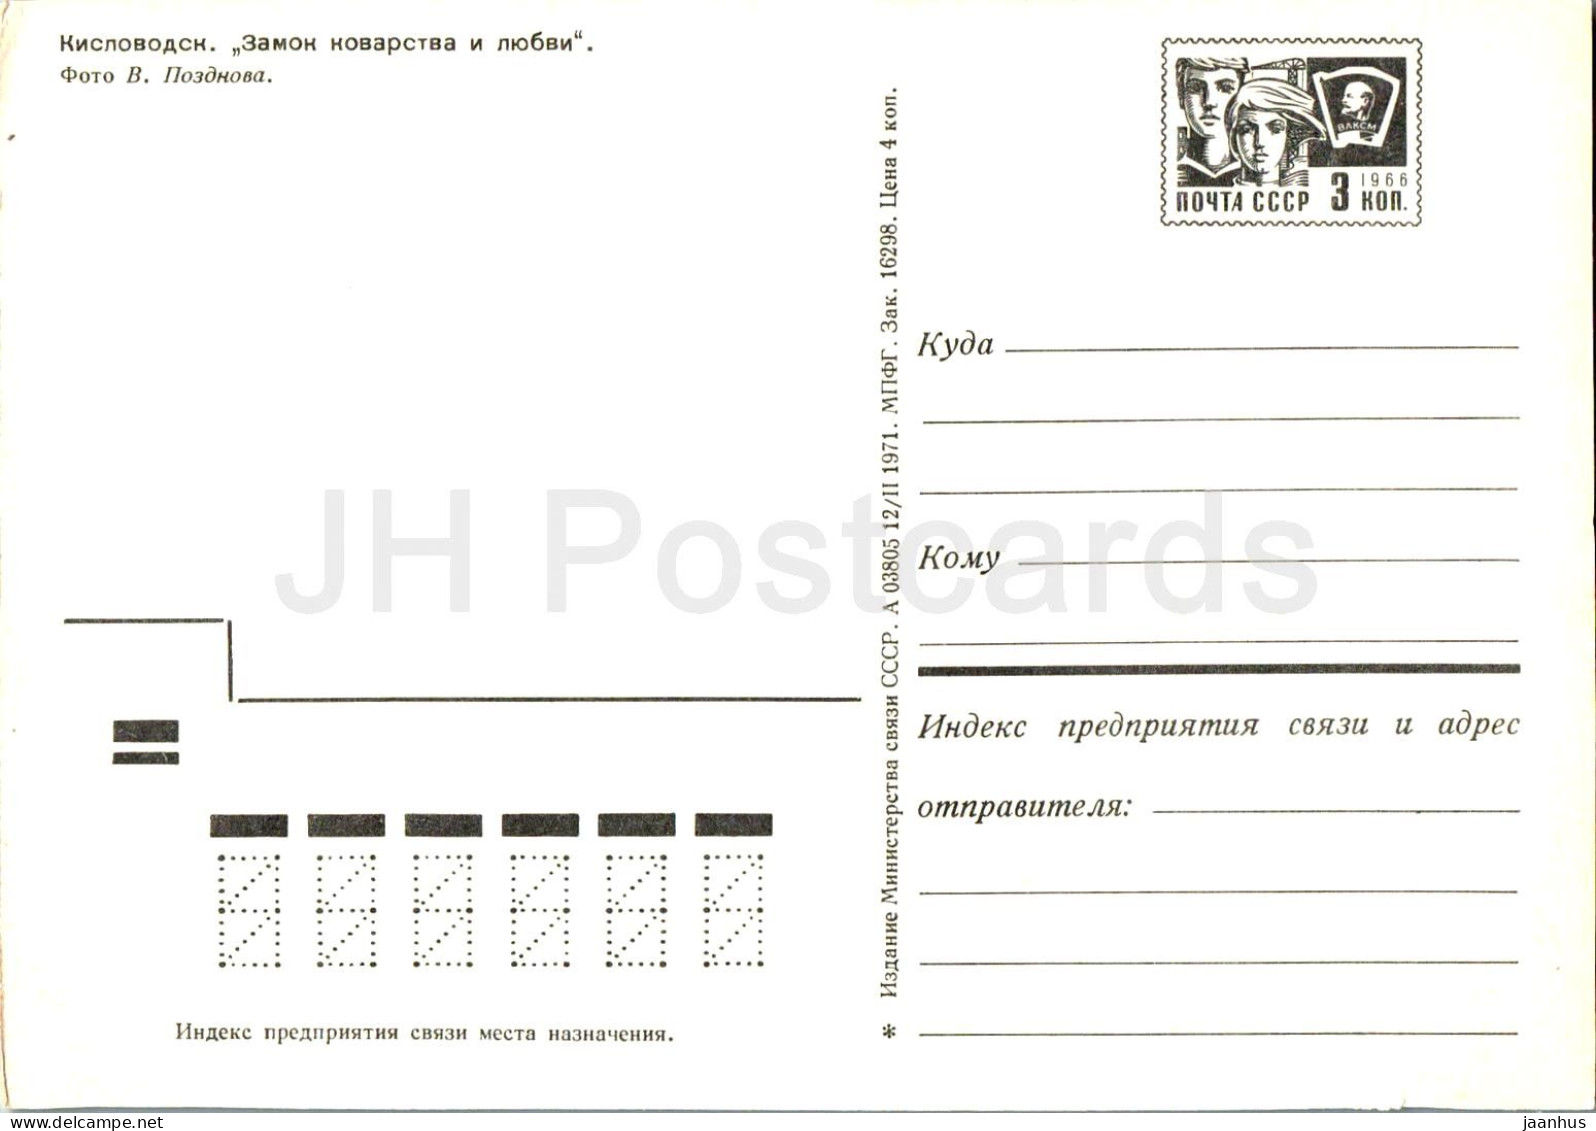 Kislovodsk - Castle Of Cunning And Love - Postal Stationery - 1971 - Russia USSR - Unused - Russie